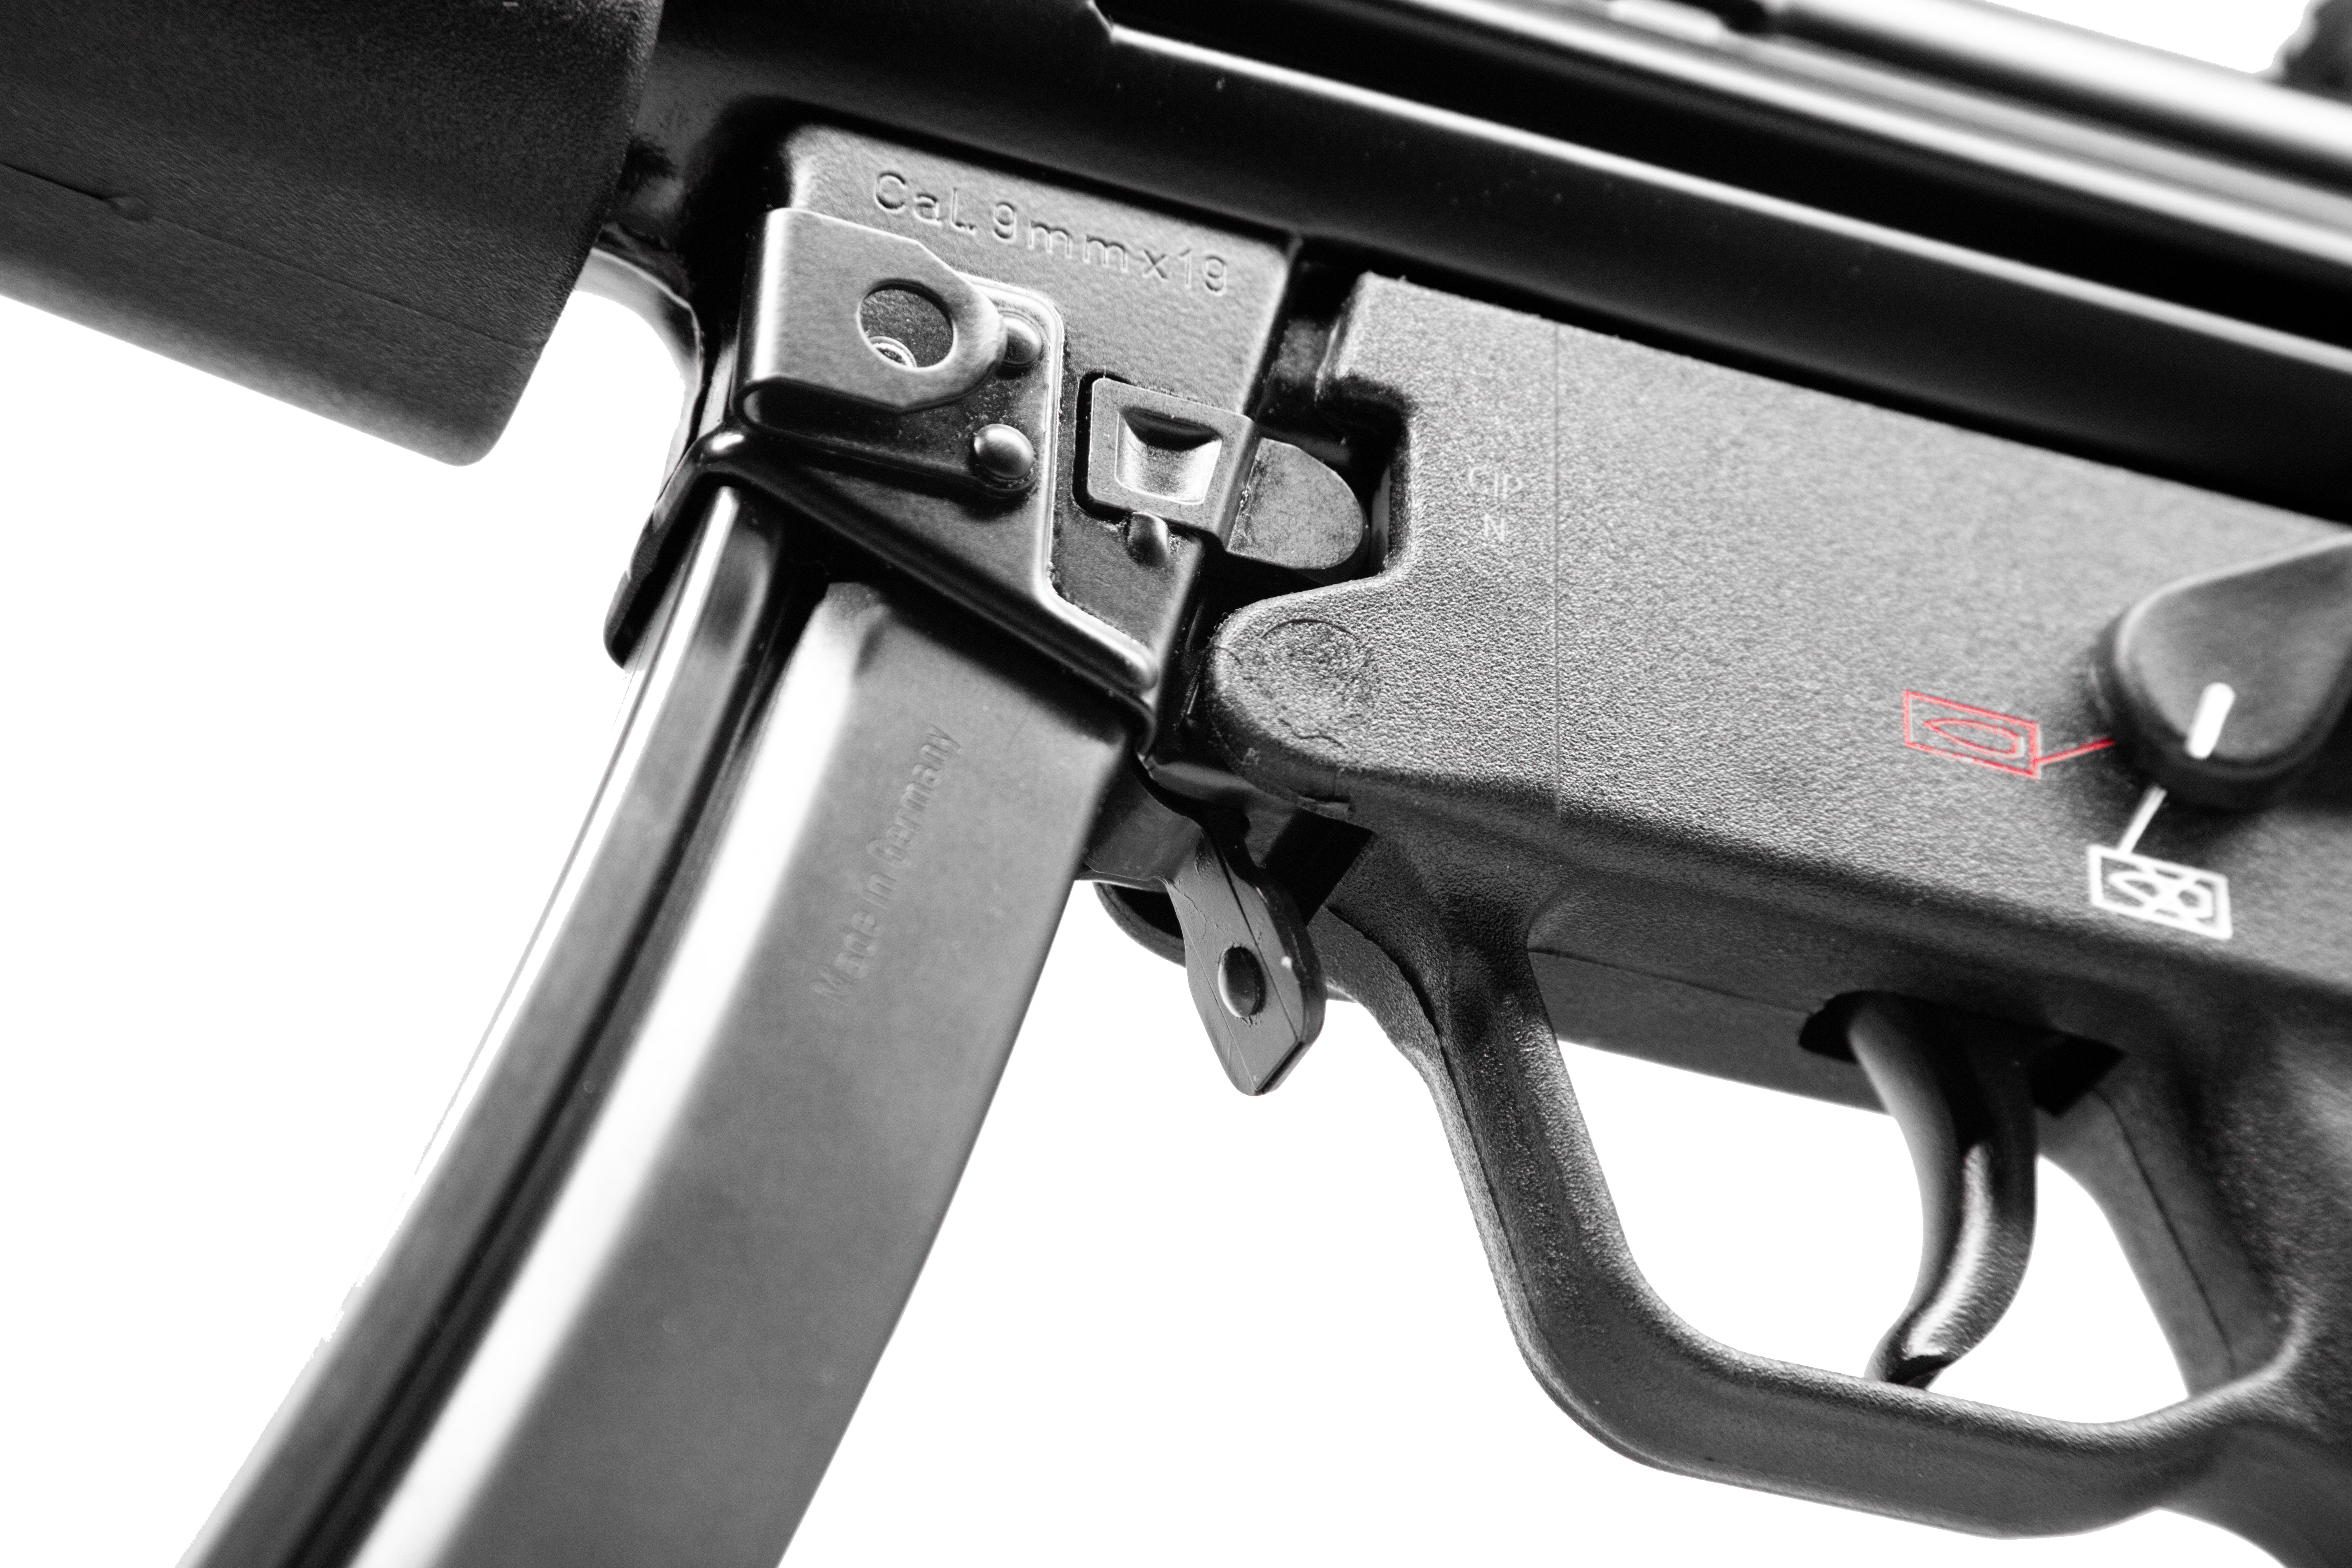 The SP5L uses the same paddle magazine as the MP5.